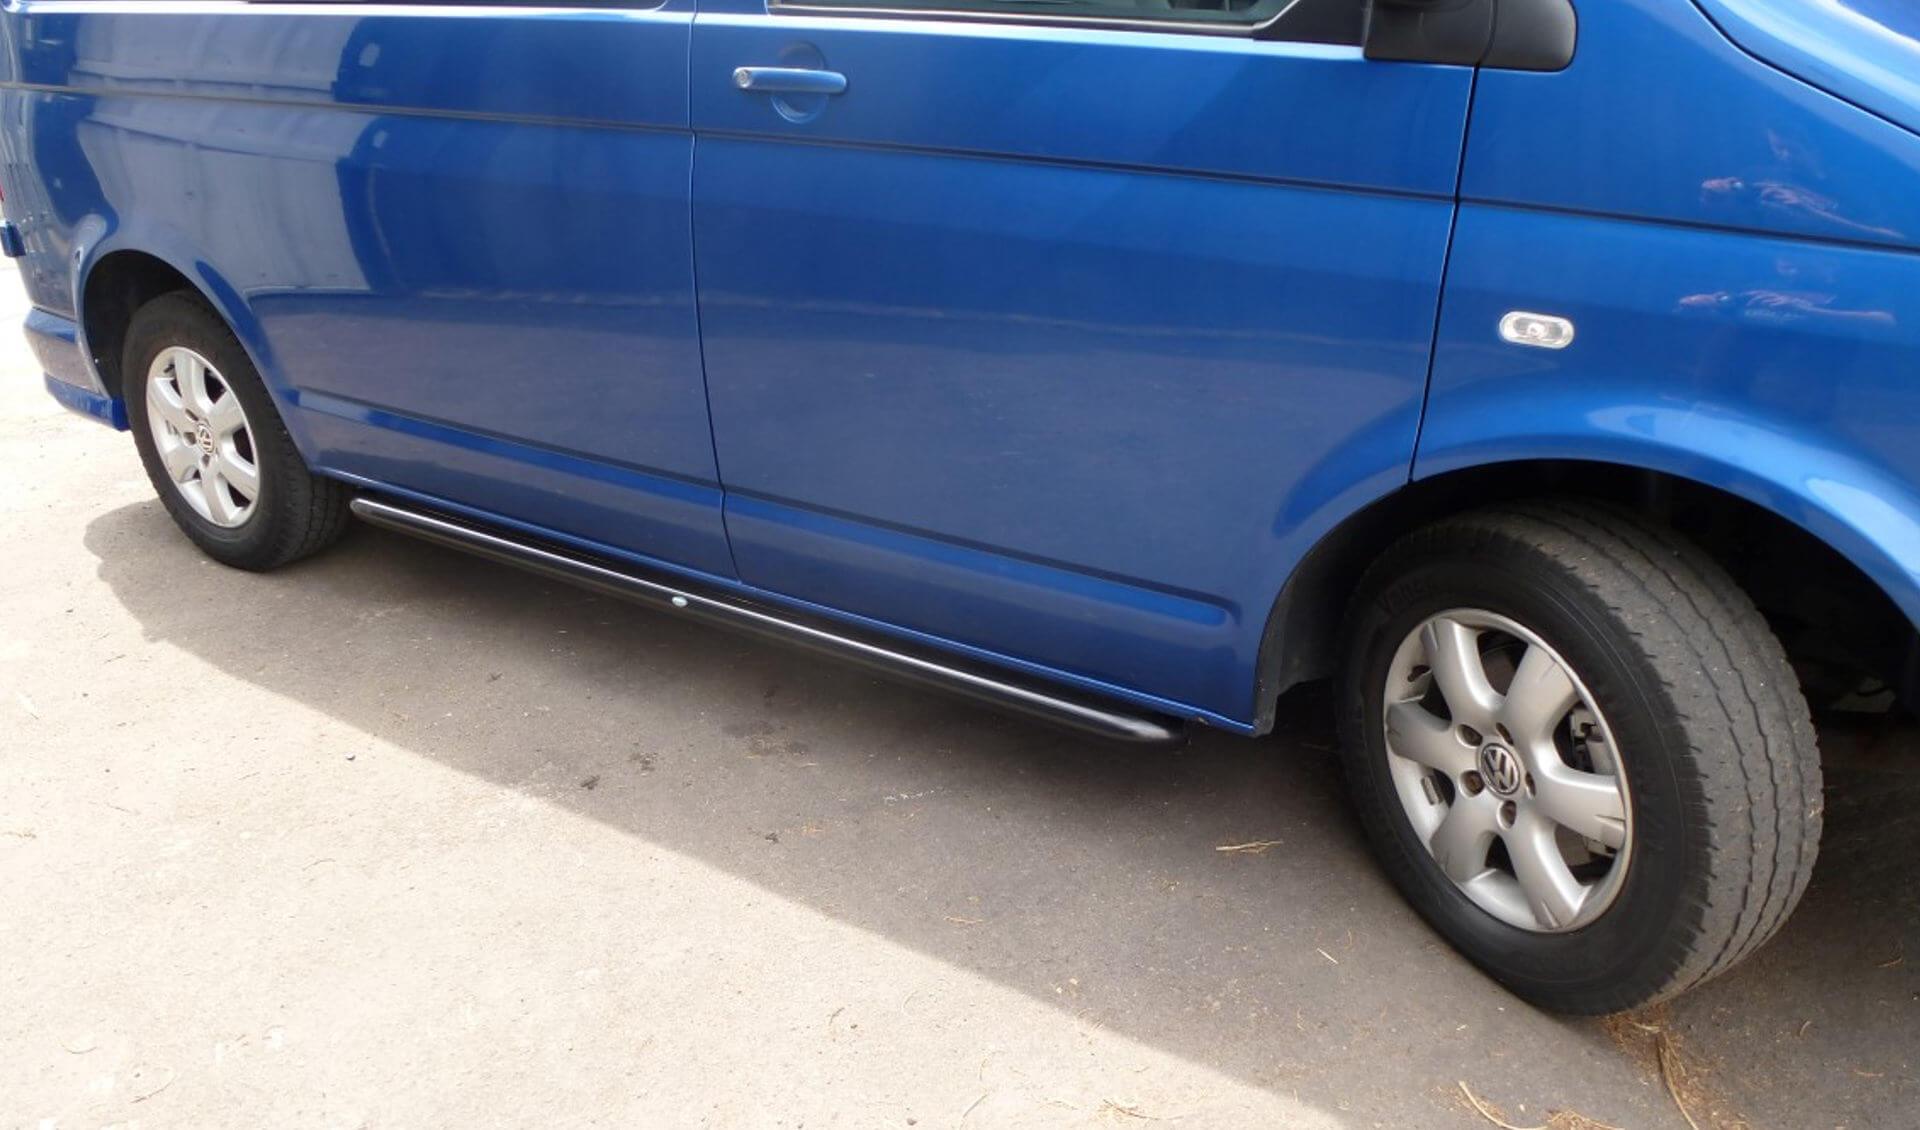 Black Powder Coated OE Style Steel Side Bars for Volkswagen Transporter T5 SWB -  - sold by Direct4x4